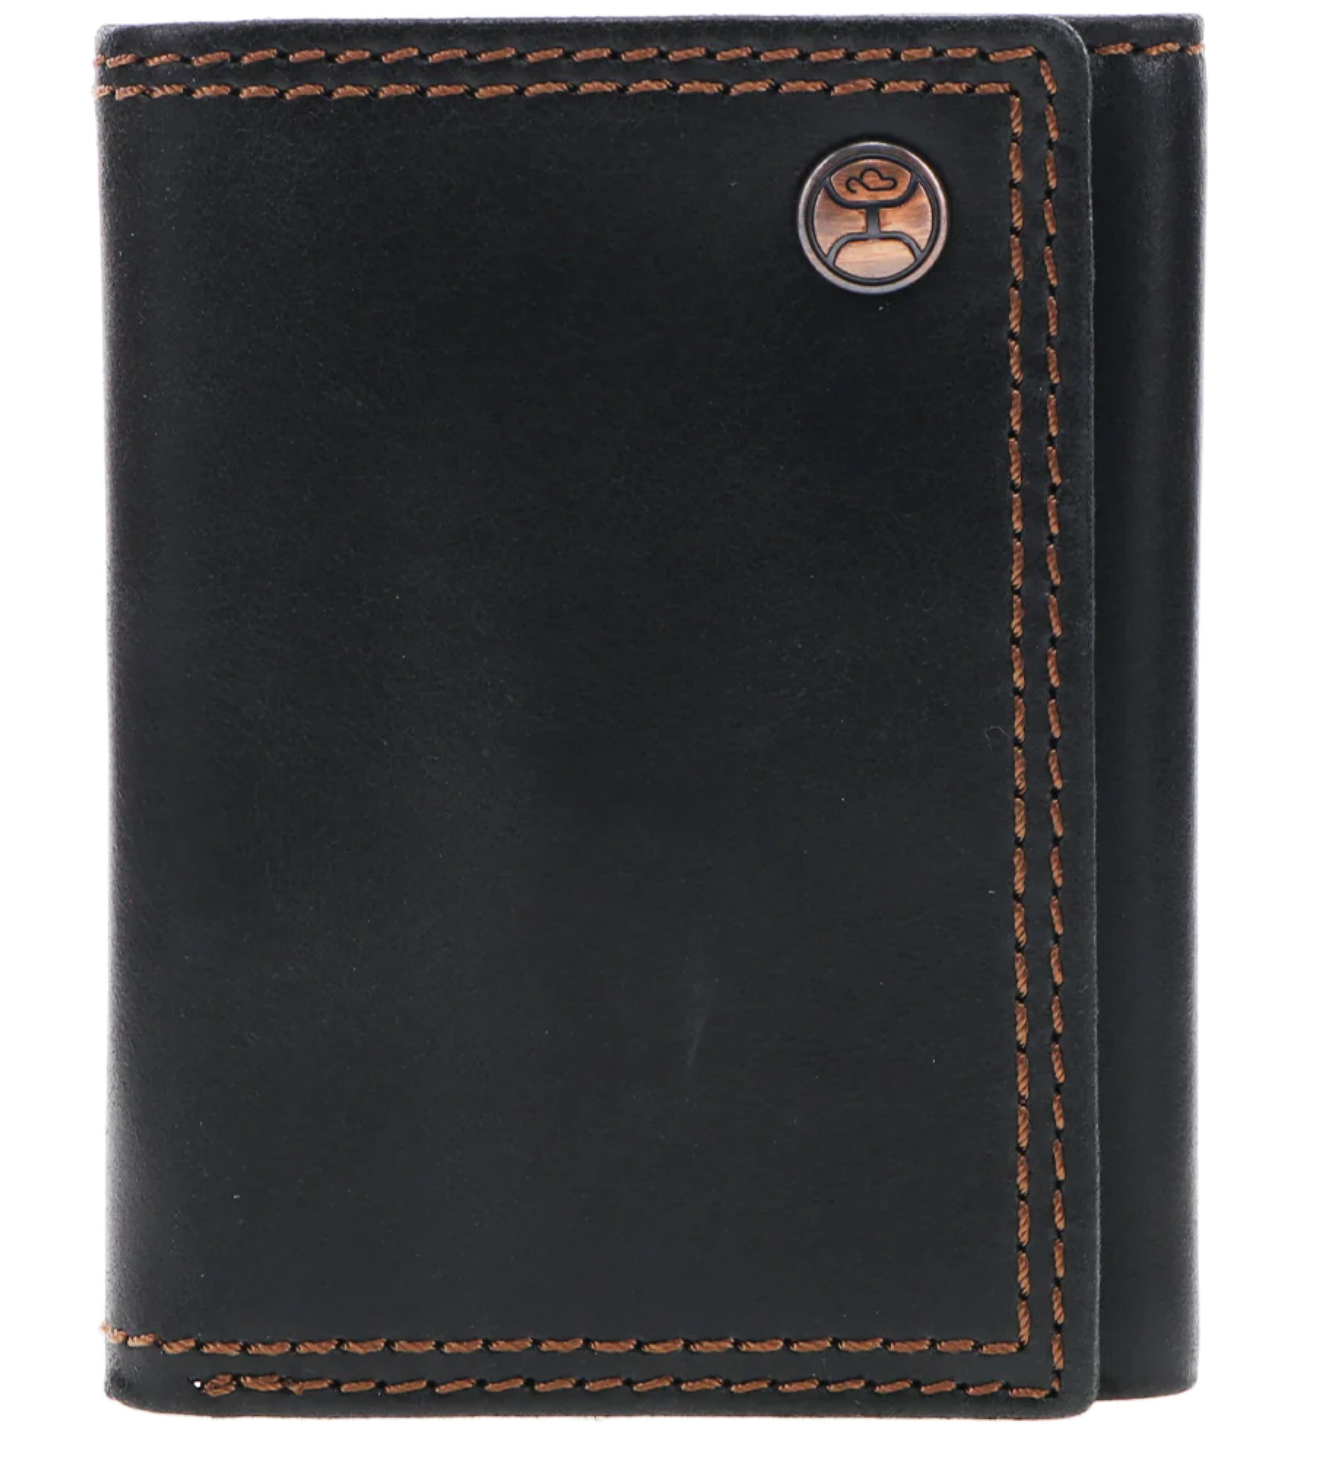 HOOEY CLASSIC SMOOTH BLACK TRIFOLD